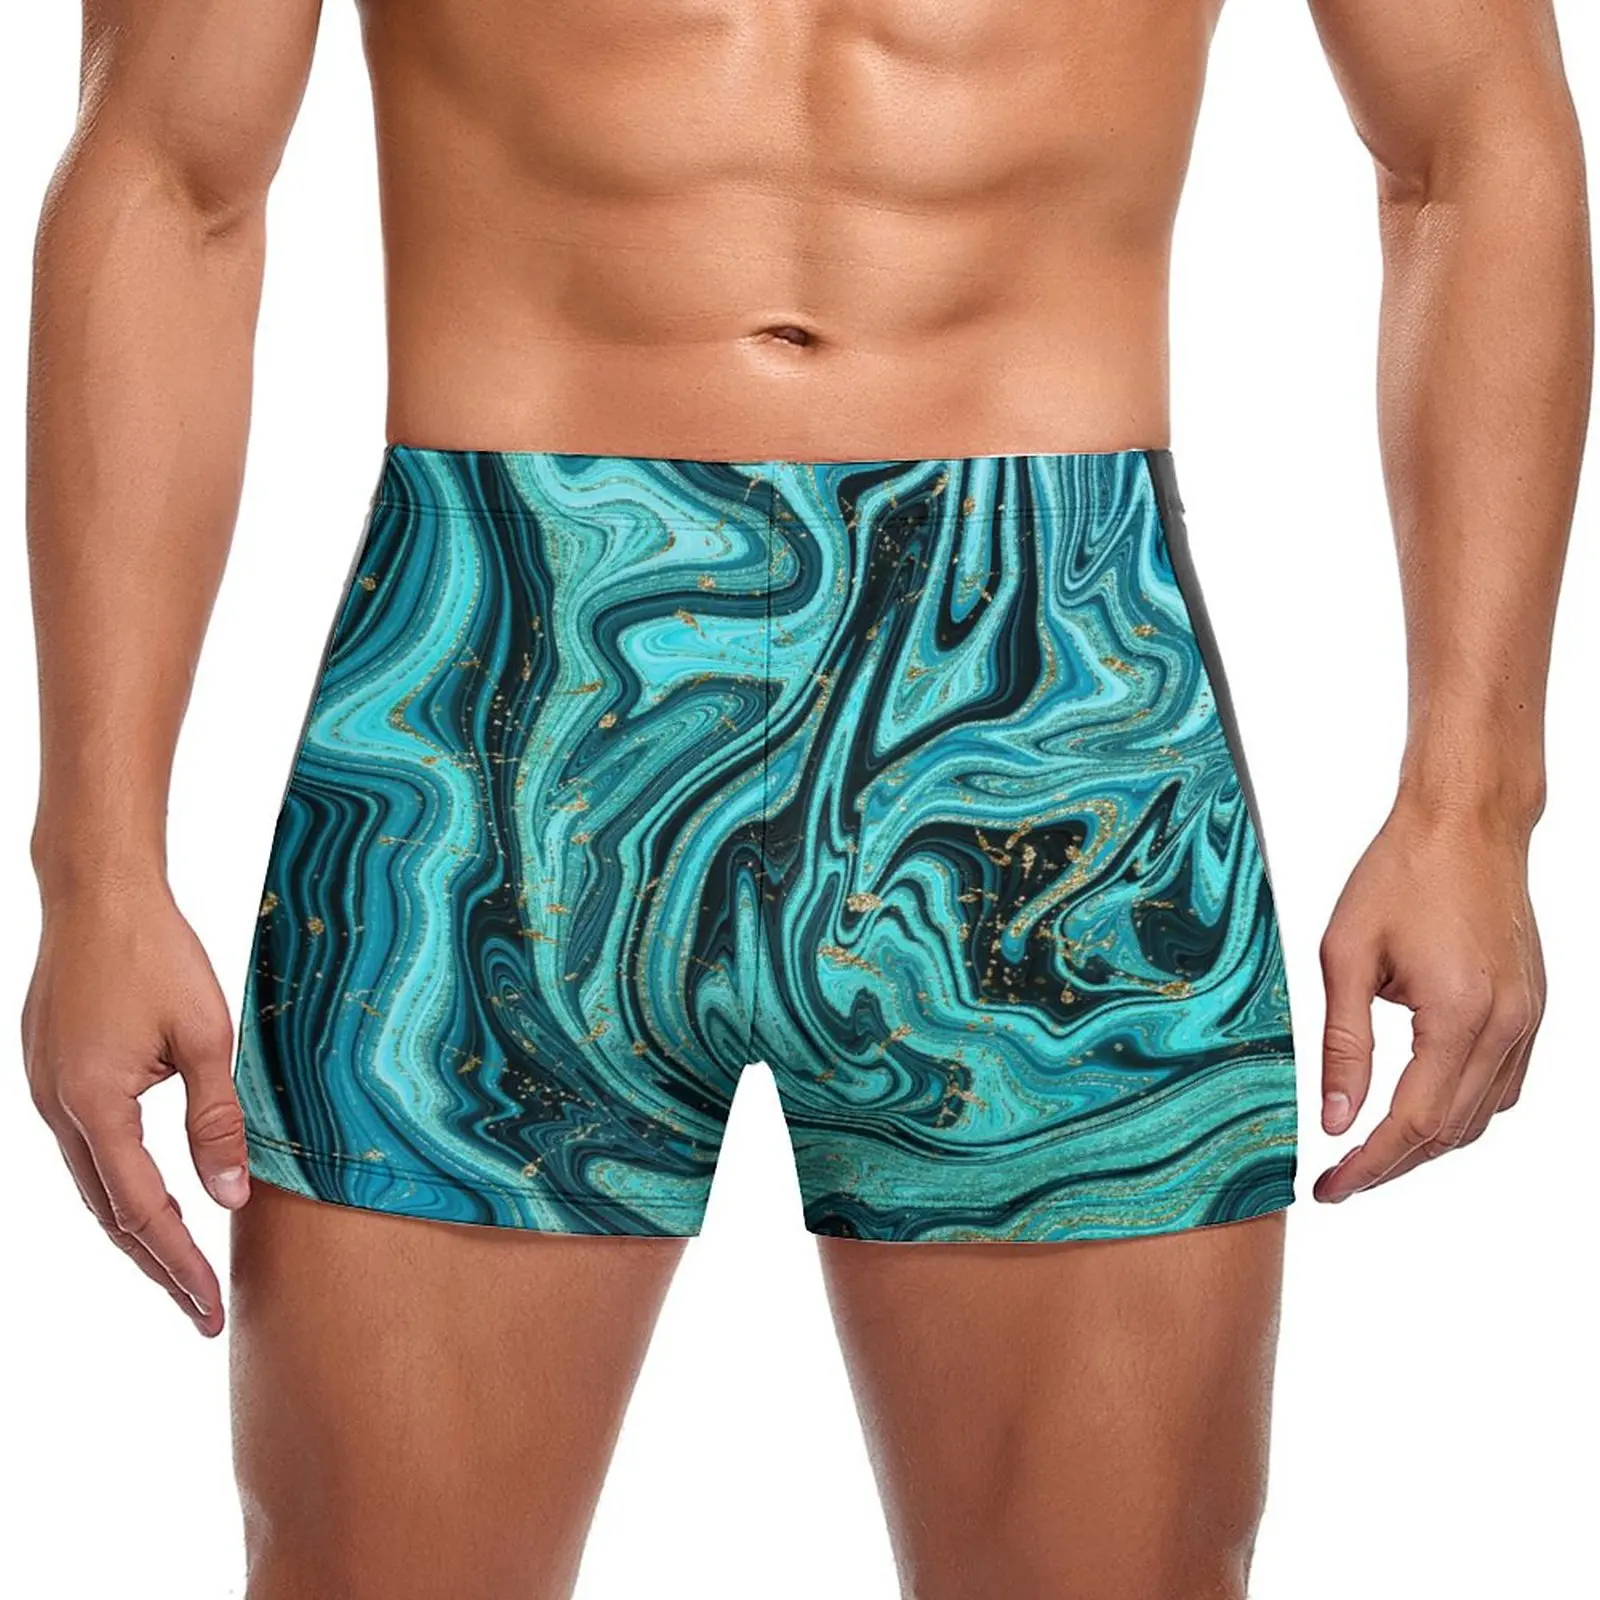 

Swirl Marble Abstract Swimming Trunks Teal Blue Gold Quick Dry Trending Swim Boxers Push Up Pool Man Swimwear